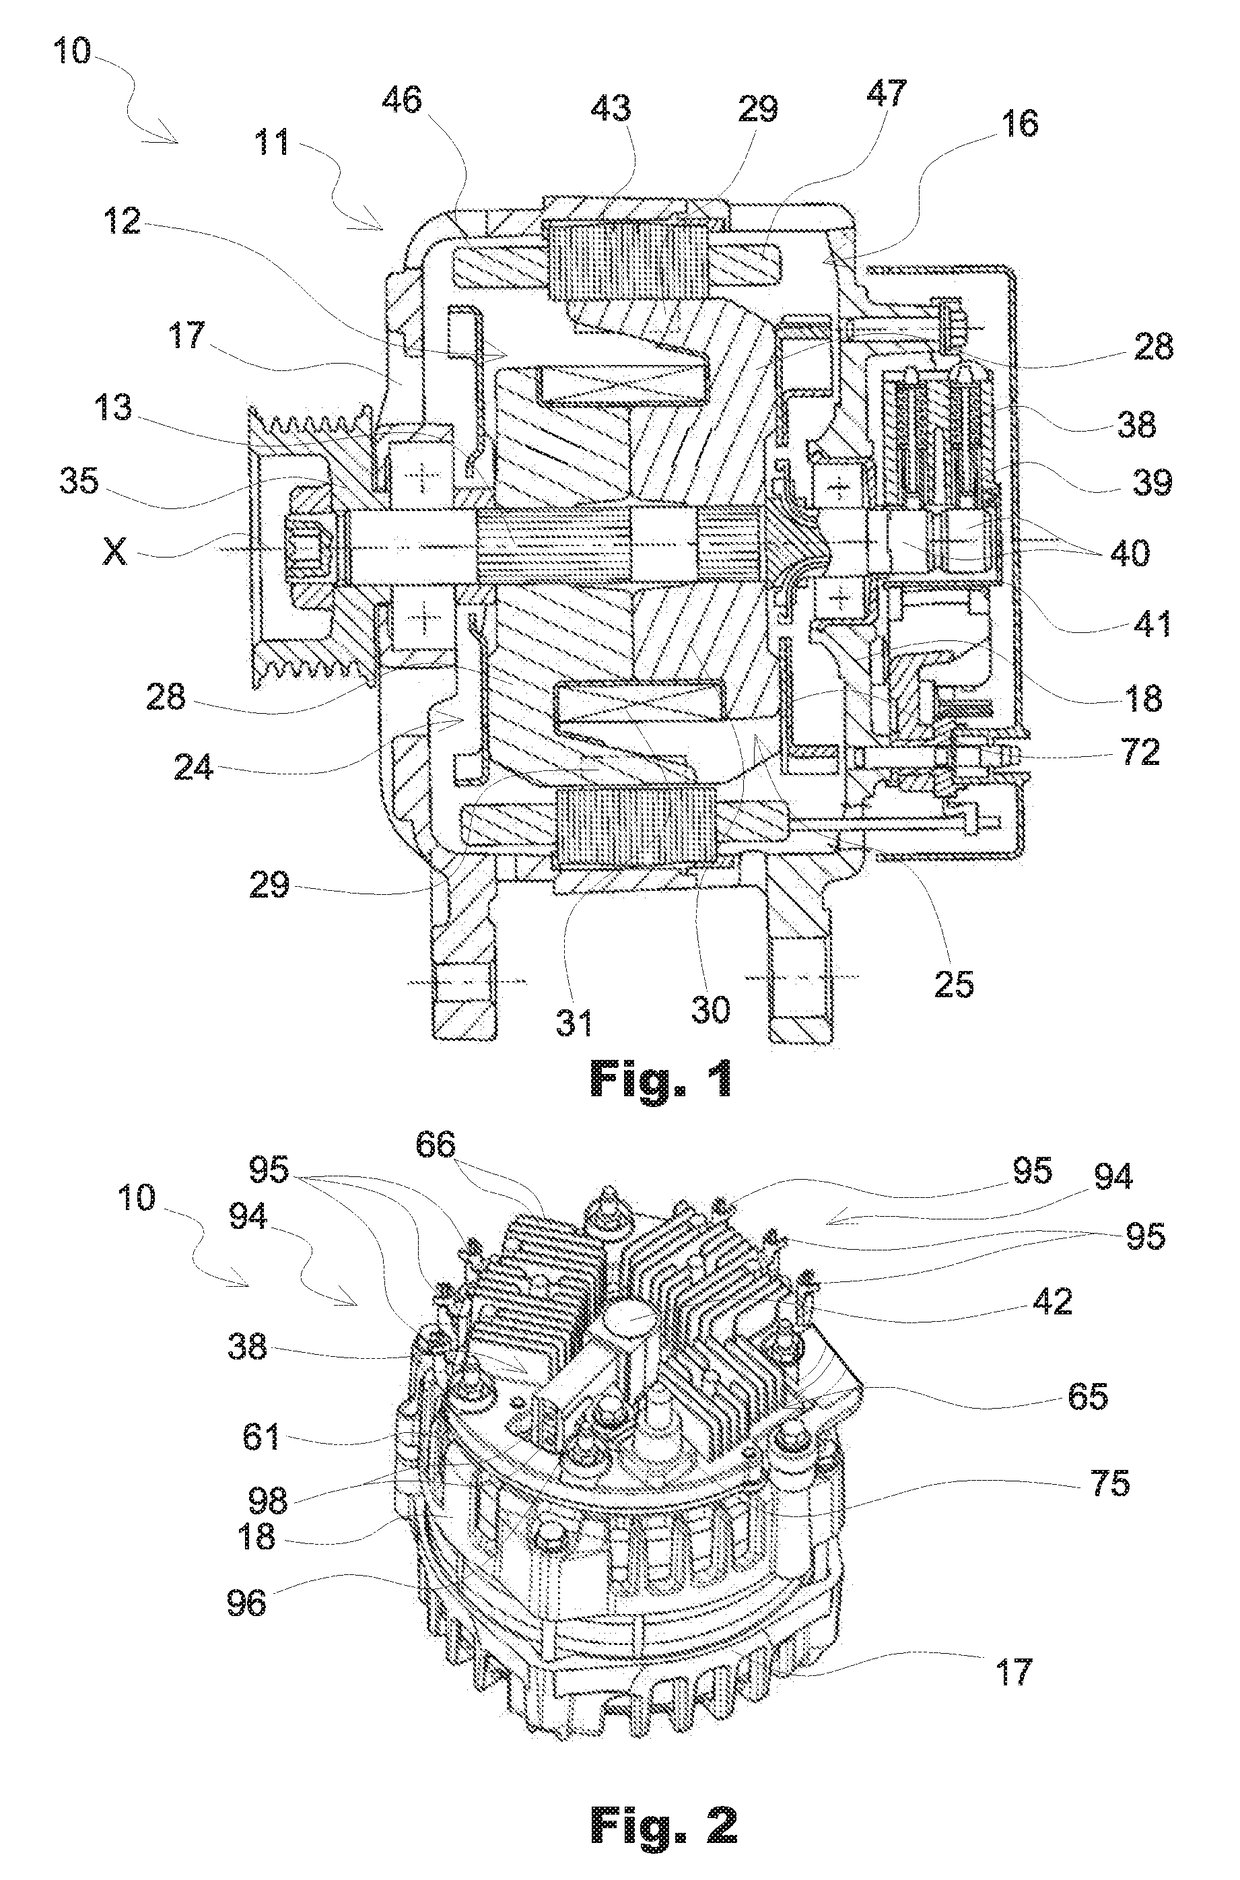 Rotary electrical machine with improved power electronics